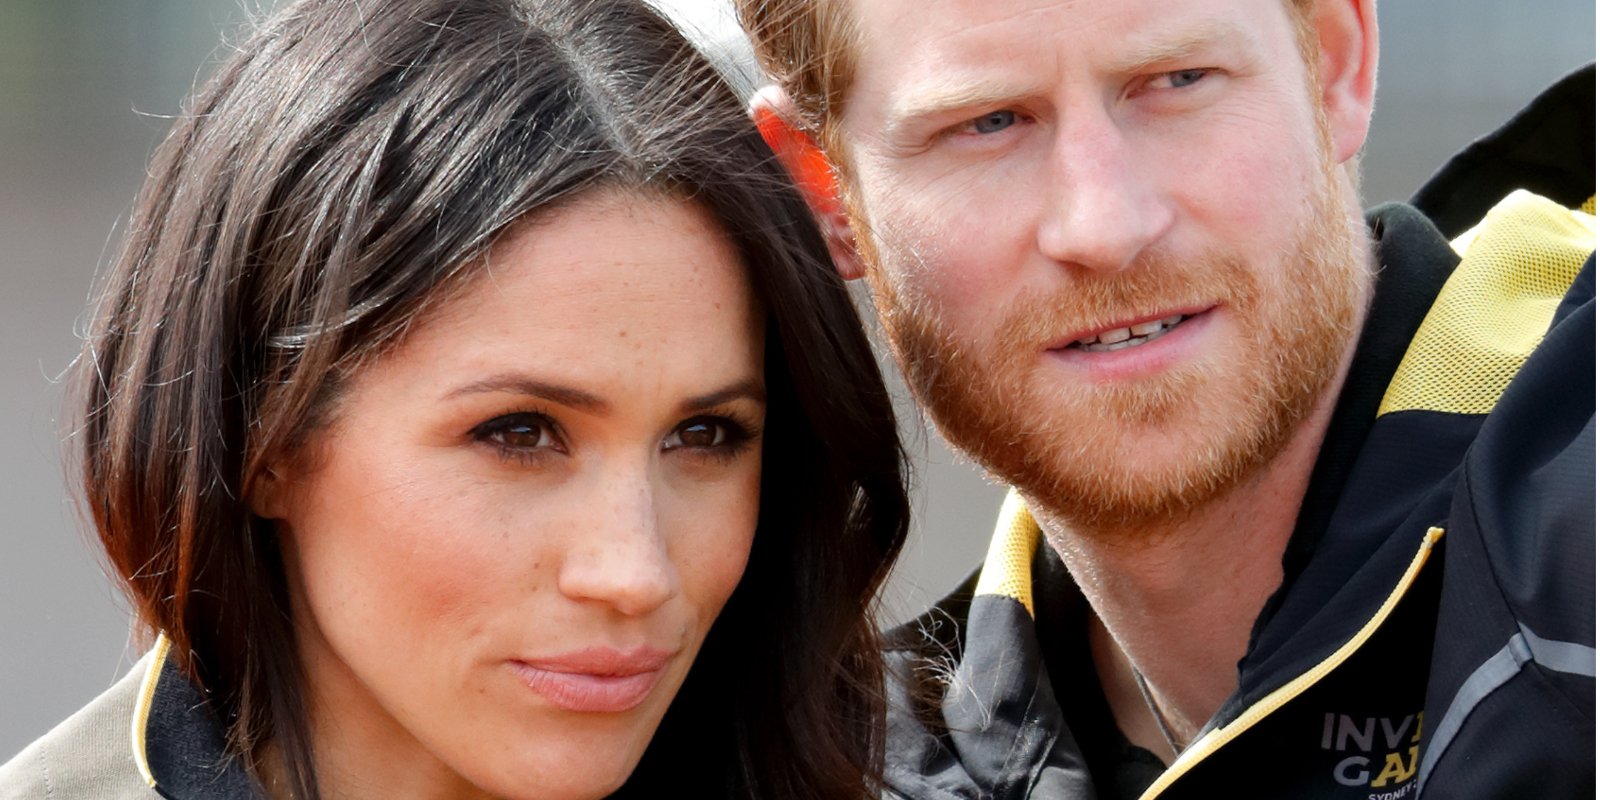 Meghan Markle and Prince Harry are on the hunt for a new home.